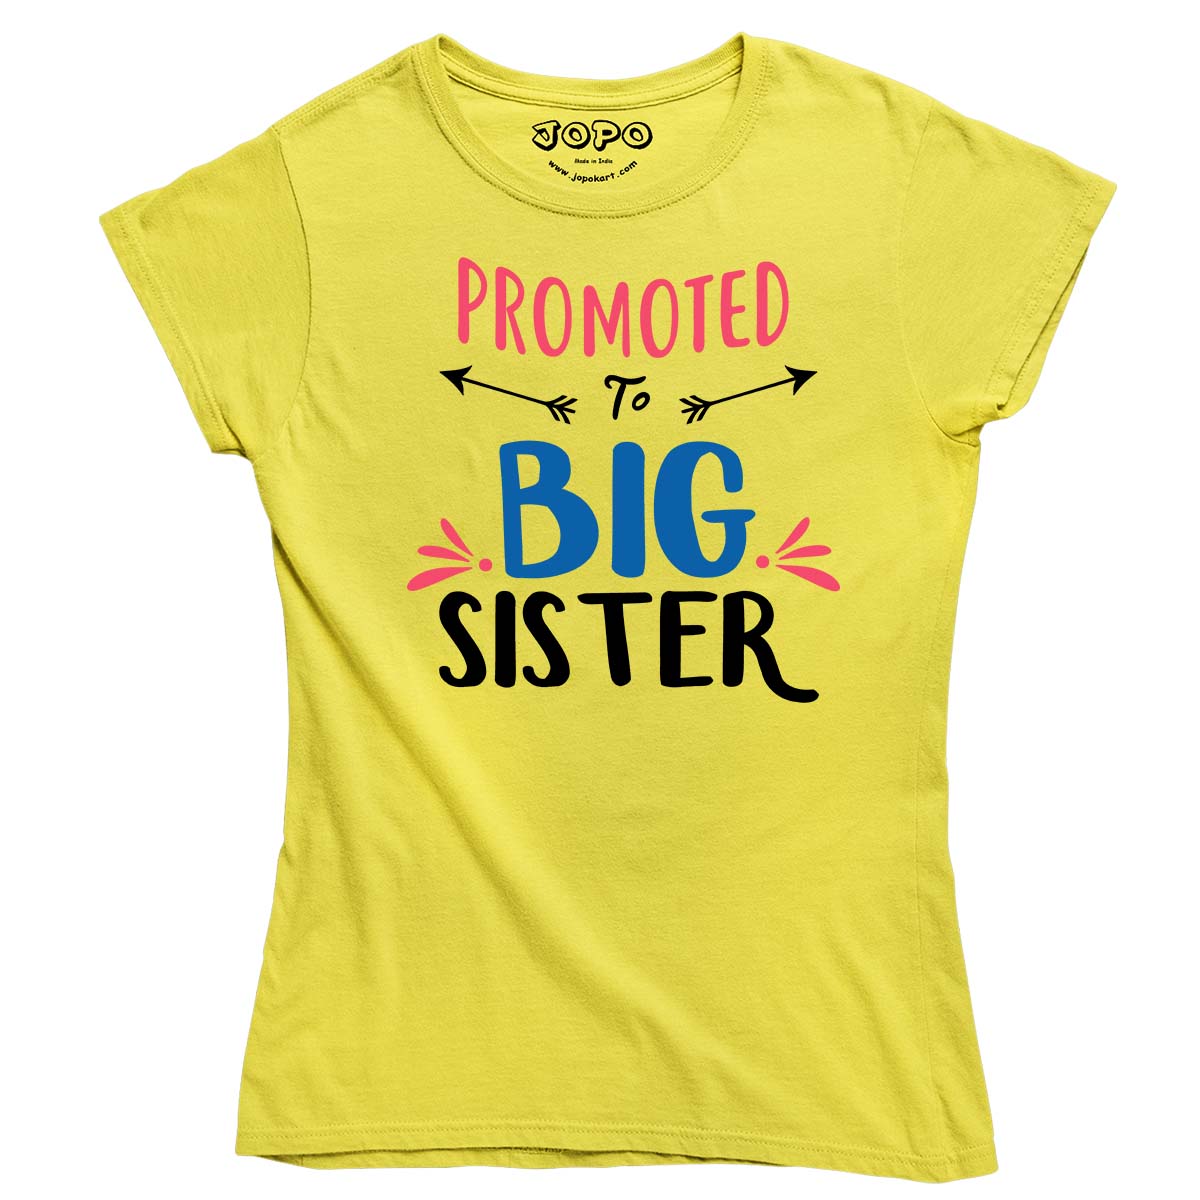 Promoted to big Sister yellow